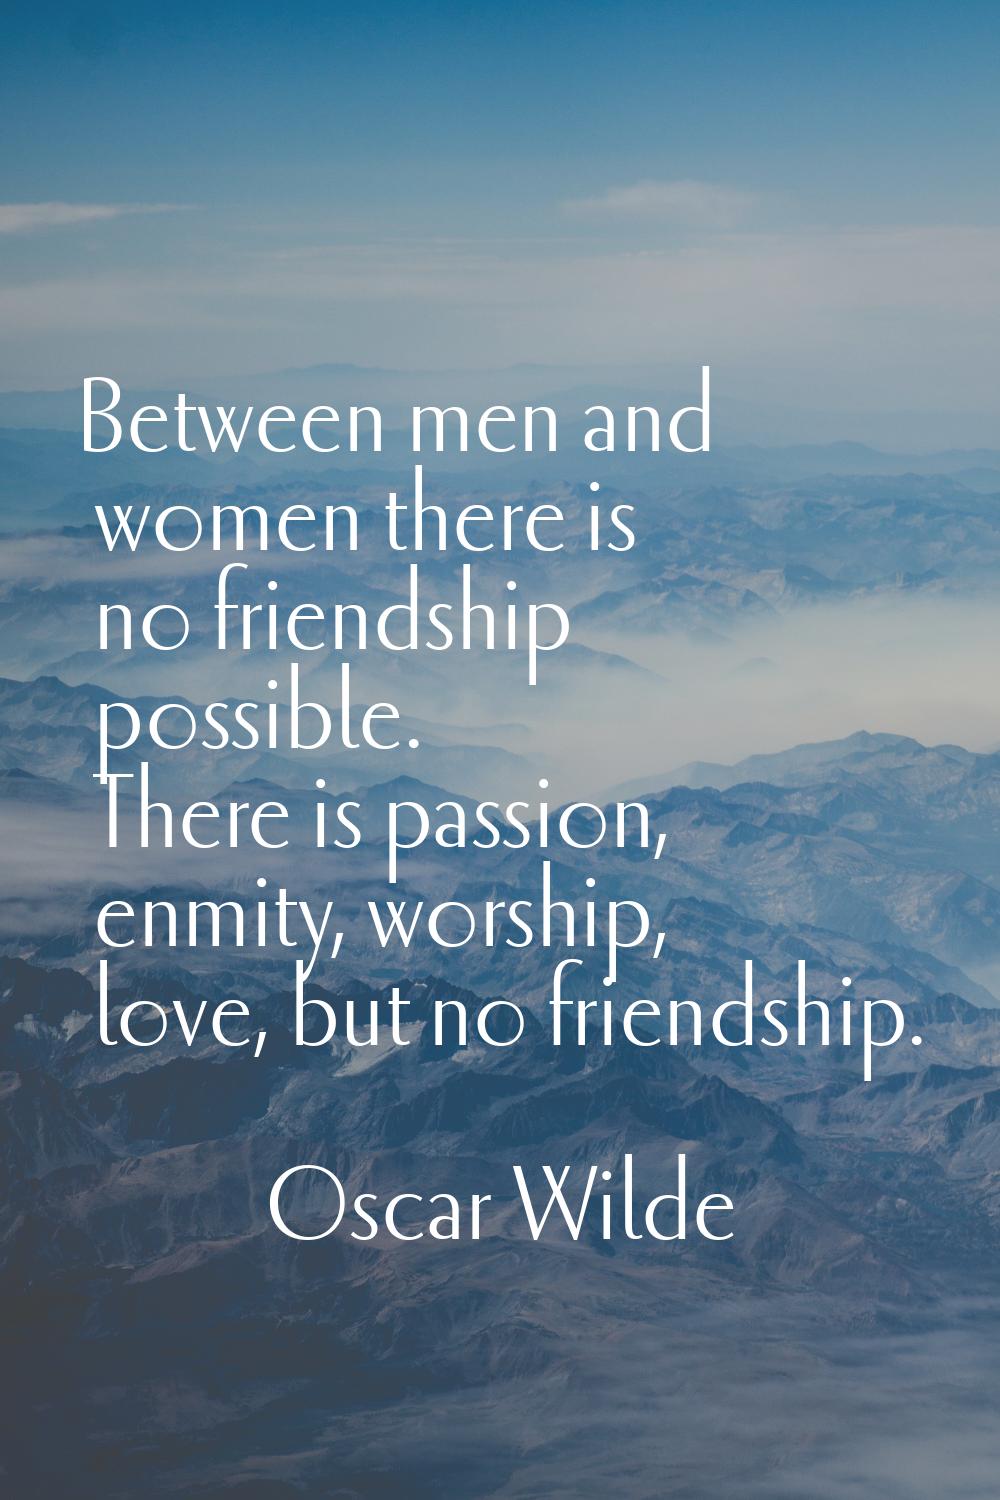 Between men and women there is no friendship possible. There is passion, enmity, worship, love, but